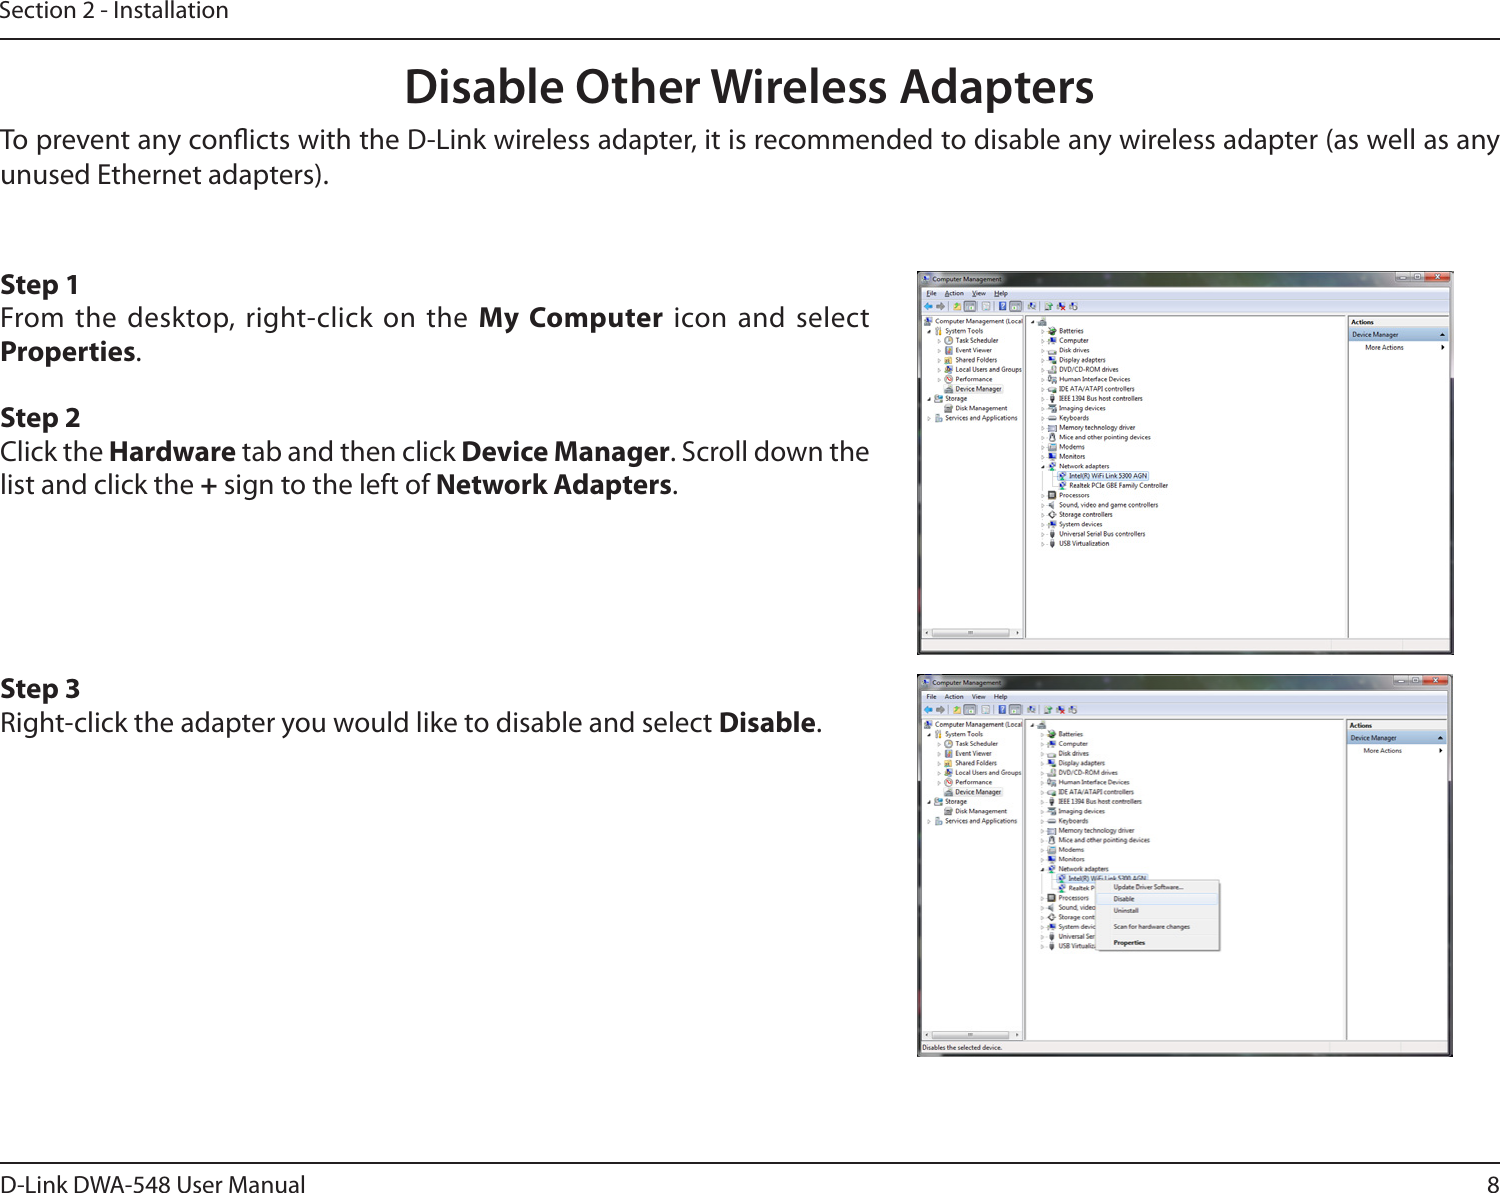 8D-Link DWA-548 User ManualSection 2 - InstallationDisable Other Wireless AdaptersStep 1From the desktop, right-click on the My Computer icon and select Properties. Step 2Click the Hardware tab and then click Device Manager. Scroll down the list and click the + sign to the left of Network Adapters.Step 3Right-click the adapter you would like to disable and select Disable.To prevent any conicts with the D-Link wireless adapter, it is recommended to disable any wireless adapter (as well as any unused Ethernet adapters).